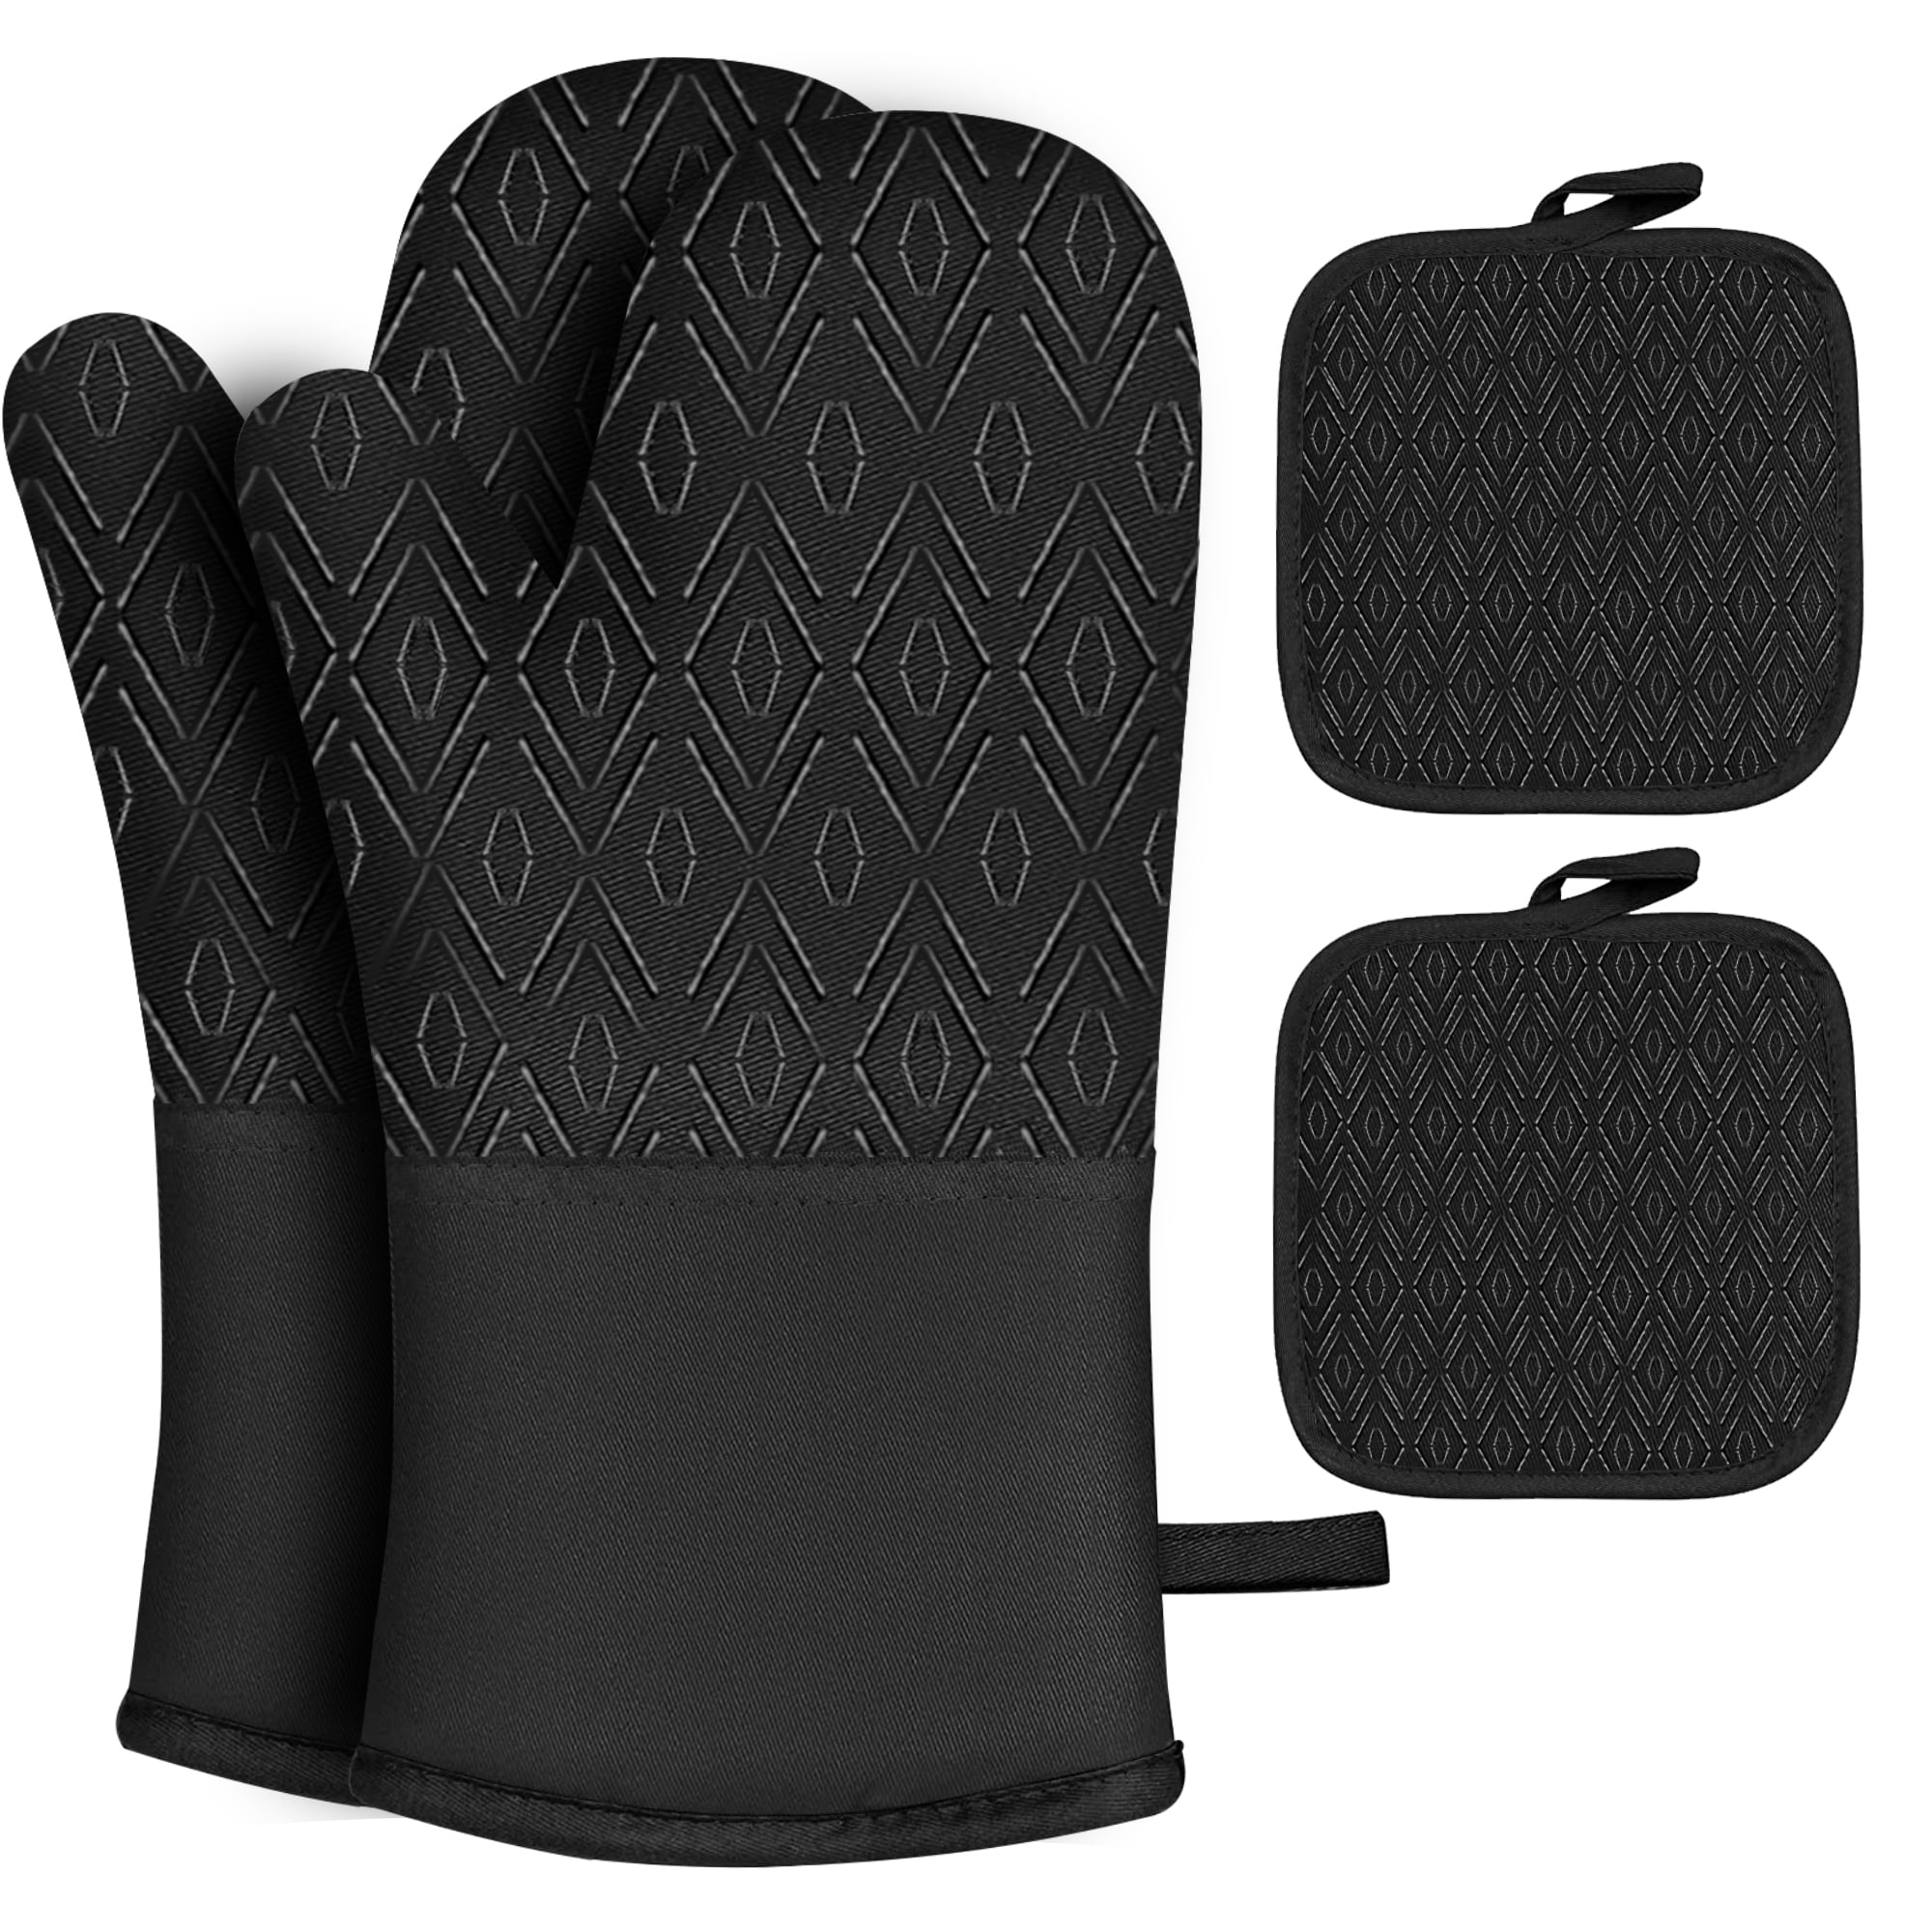 Oven Mitts and Pot Holders Set 4Pcs, Oven Mitt 572F Heat Resistant for  Kitchen, Soft Cotton Lining Oven Gloves with Non-Slip Silicone Surface for